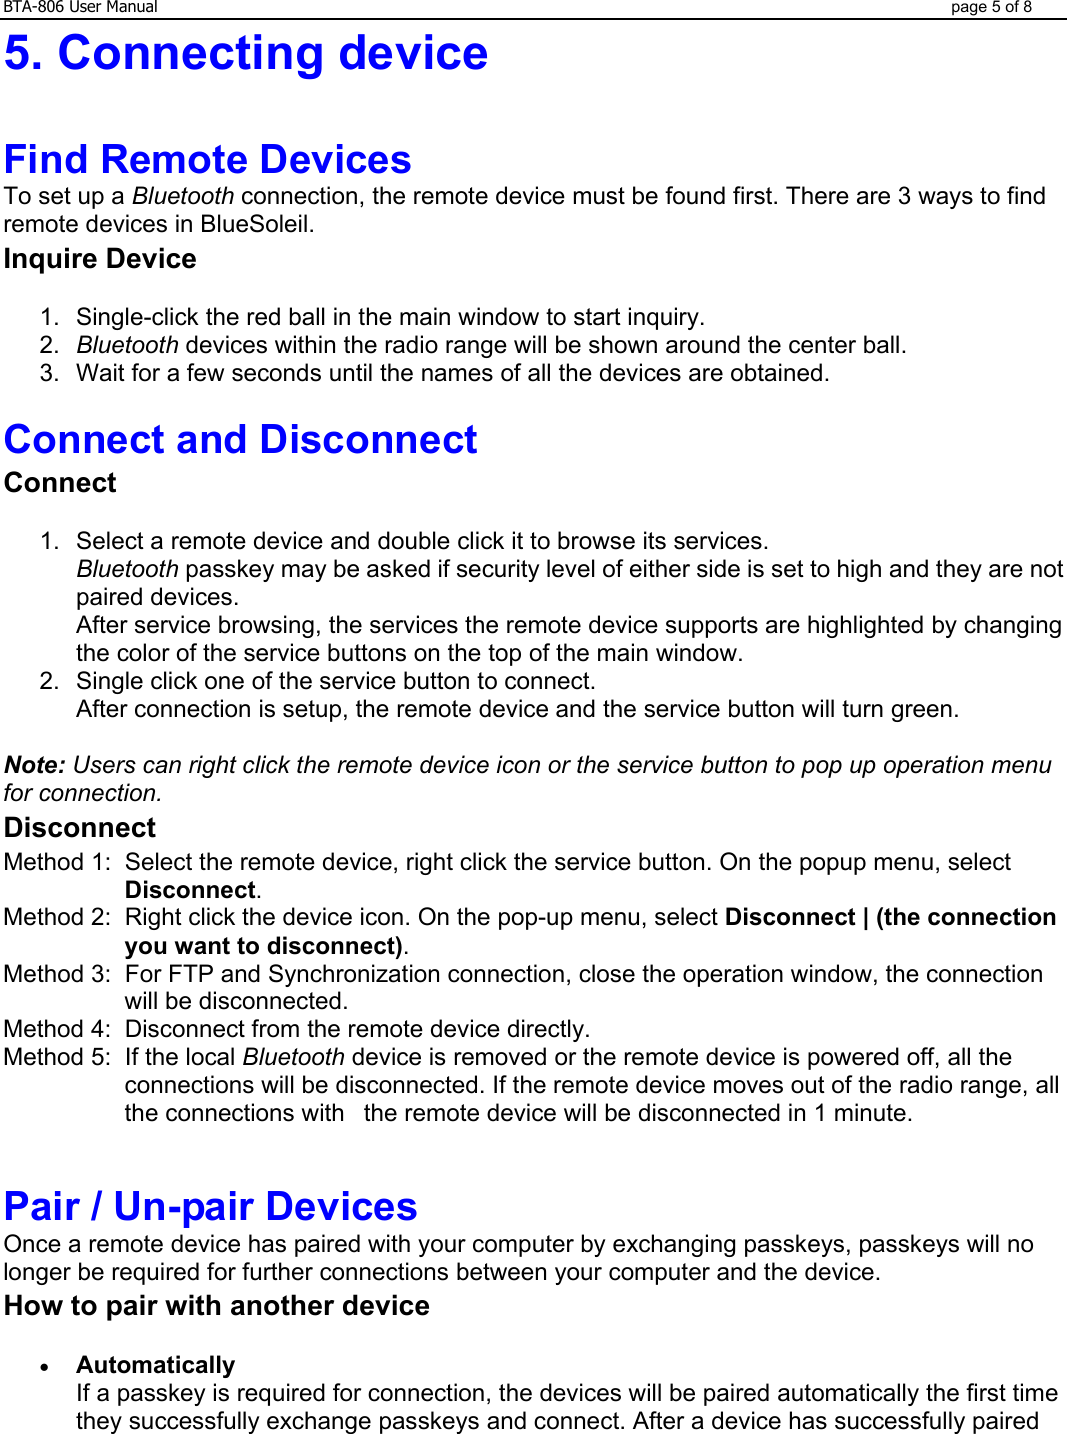 BTA-806 User Manual  page 5 of 8 5. Connecting device    Find Remote Devices To set up a Bluetooth connection, the remote device must be found first. There are 3 ways to find remote devices in BlueSoleil. Inquire Device 1.  Single-click the red ball in the main window to start inquiry.    2.  Bluetooth devices within the radio range will be shown around the center ball.    3.  Wait for a few seconds until the names of all the devices are obtained.   Connect and Disconnect Connect 1.  Select a remote device and double click it to browse its services. Bluetooth passkey may be asked if security level of either side is set to high and they are not paired devices. After service browsing, the services the remote device supports are highlighted by changing the color of the service buttons on the top of the main window.   2.  Single click one of the service button to connect. After connection is setup, the remote device and the service button will turn green.   Note: Users can right click the remote device icon or the service button to pop up operation menu for connection. Disconnect Method 1:  Select the remote device, right click the service button. On the popup menu, select Disconnect. Method 2:  Right click the device icon. On the pop-up menu, select Disconnect | (the connection you want to disconnect). Method 3:  For FTP and Synchronization connection, close the operation window, the connection will be disconnected. Method 4:  Disconnect from the remote device directly. Method 5:  If the local Bluetooth device is removed or the remote device is powered off, all the connections will be disconnected. If the remote device moves out of the radio range, all the connections with   the remote device will be disconnected in 1 minute.  Pair / Un-pair Devices Once a remote device has paired with your computer by exchanging passkeys, passkeys will no longer be required for further connections between your computer and the device. How to pair with another device • Automatically If a passkey is required for connection, the devices will be paired automatically the first time they successfully exchange passkeys and connect. After a device has successfully paired 